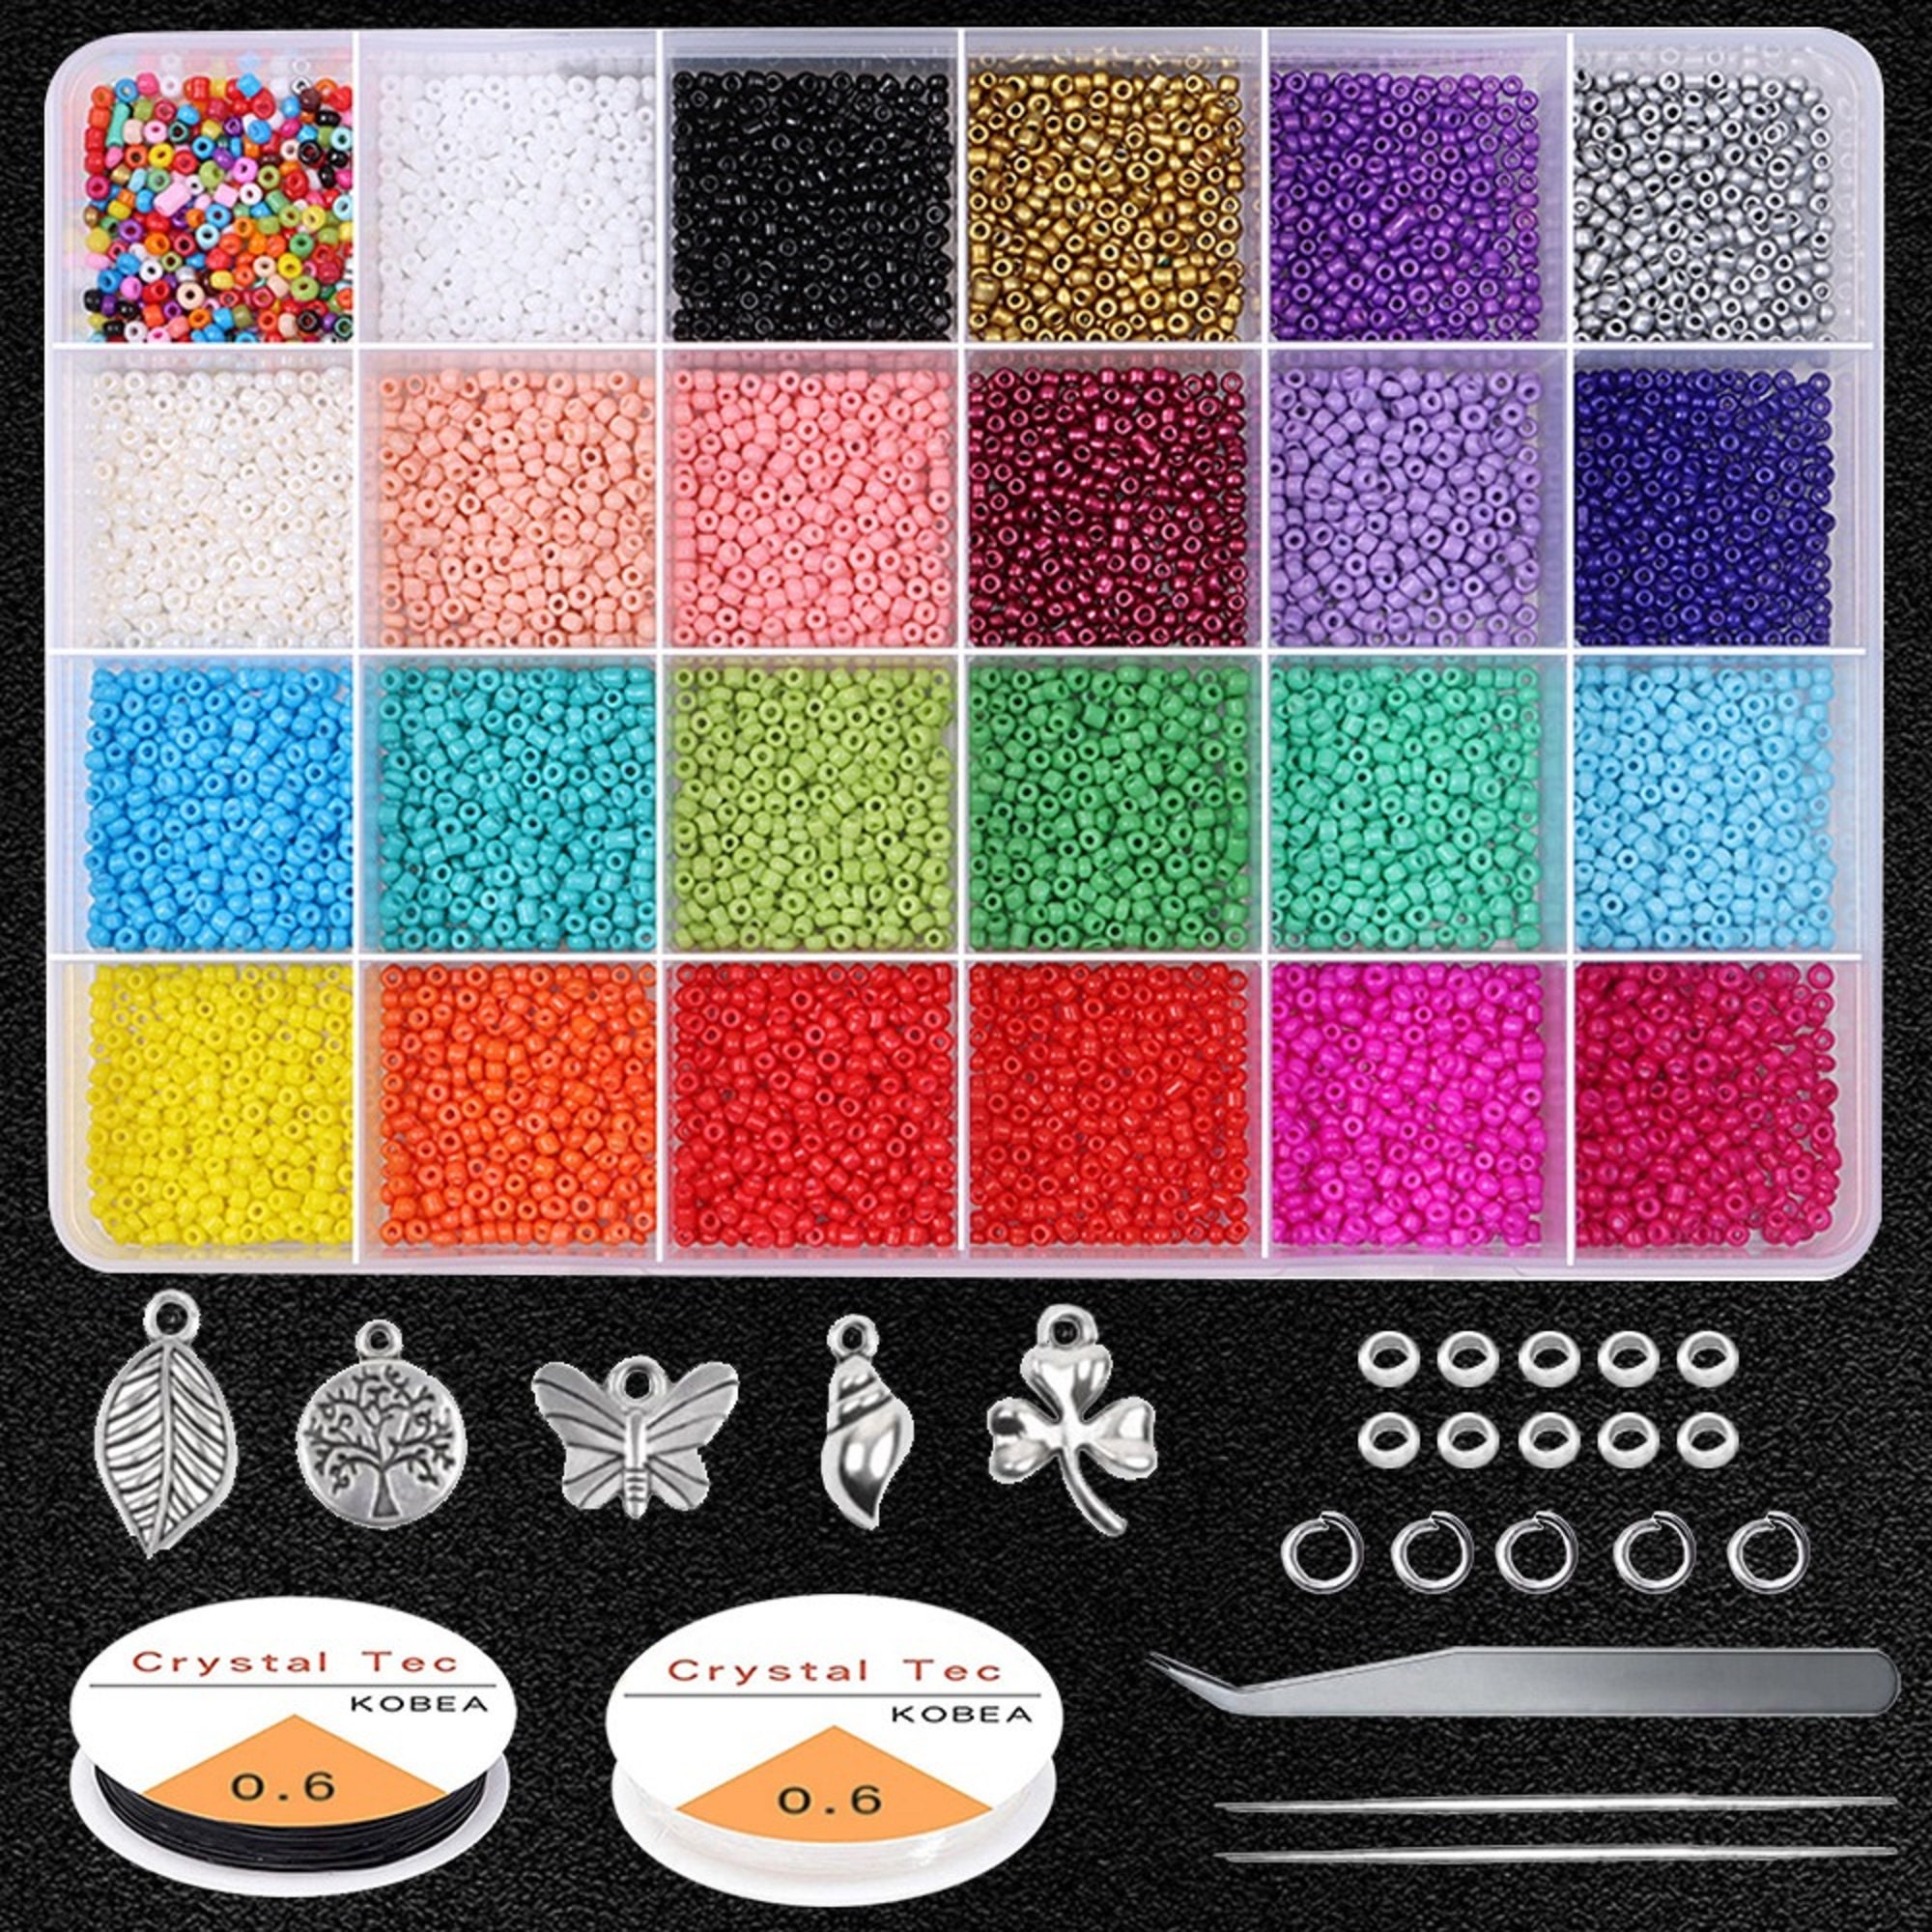 Miyuki Seed Beads Starter Set, 56 Colours 280 Gr 11/0 Round Seed Beads,  Needle, Thread,Container